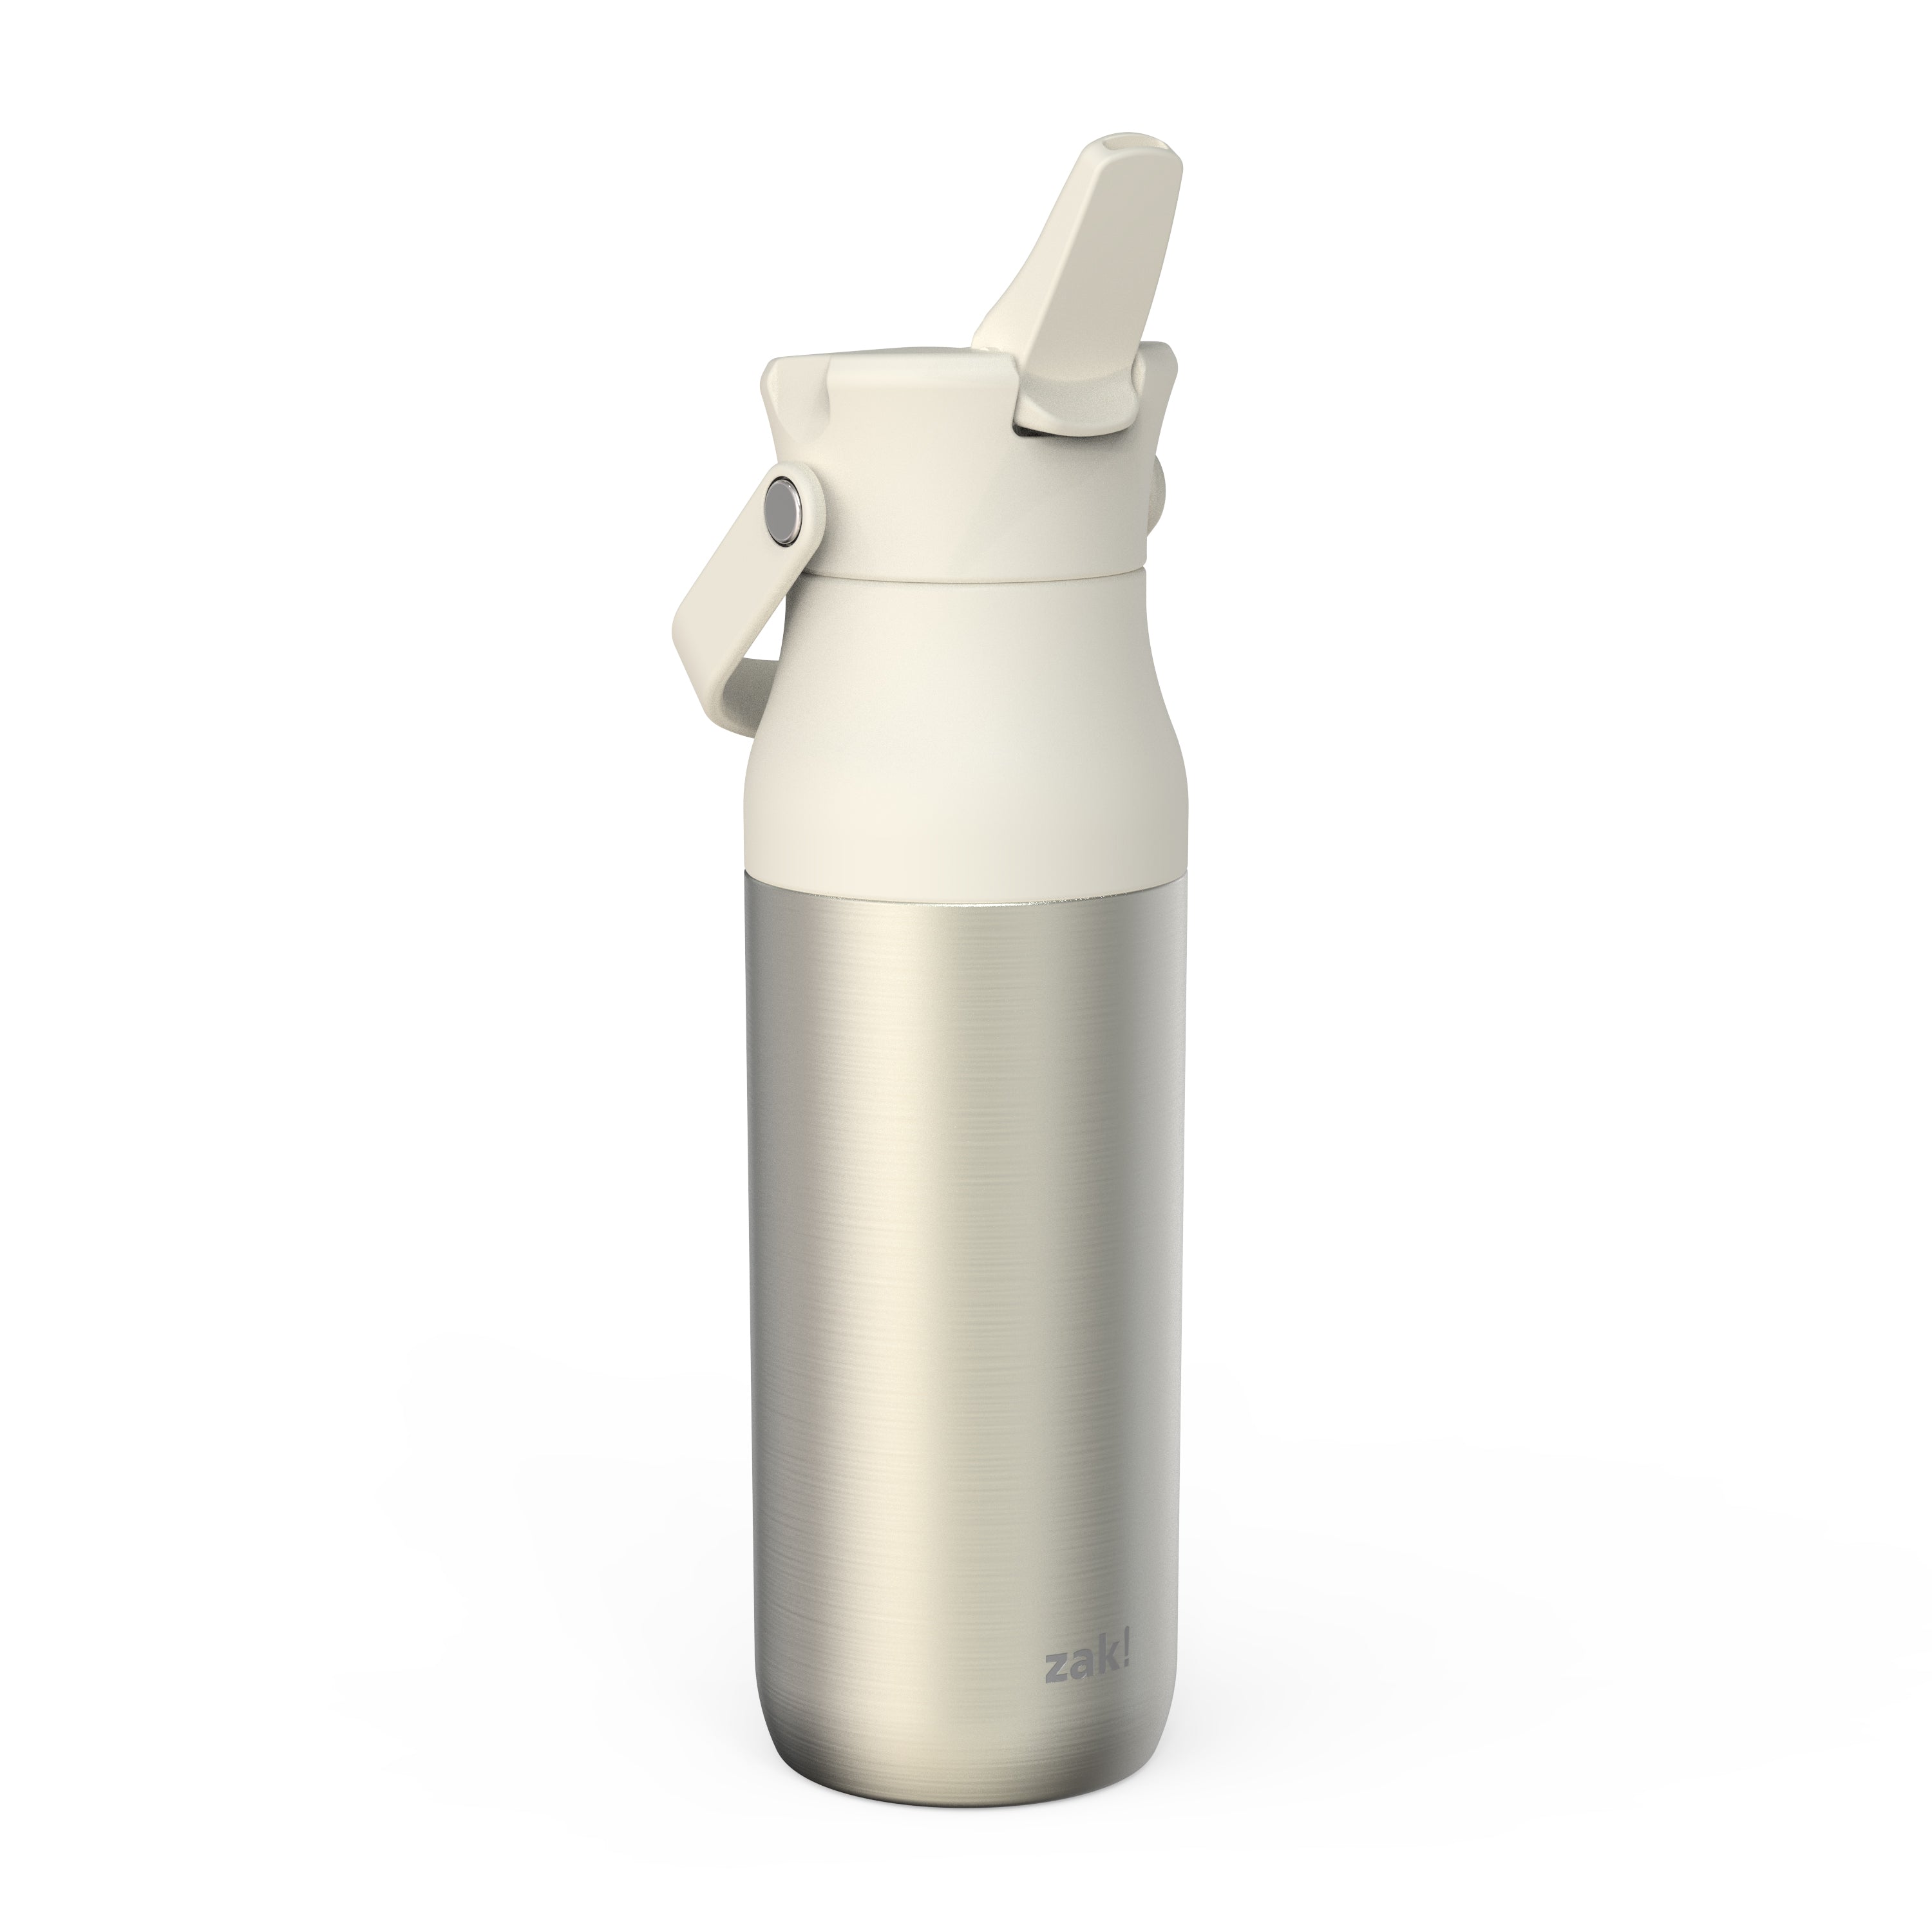 Harmony Recycled Stainless Steel Insulated Water Bottle with Flip-Up Straw Spout - Ivory, 32 ounces